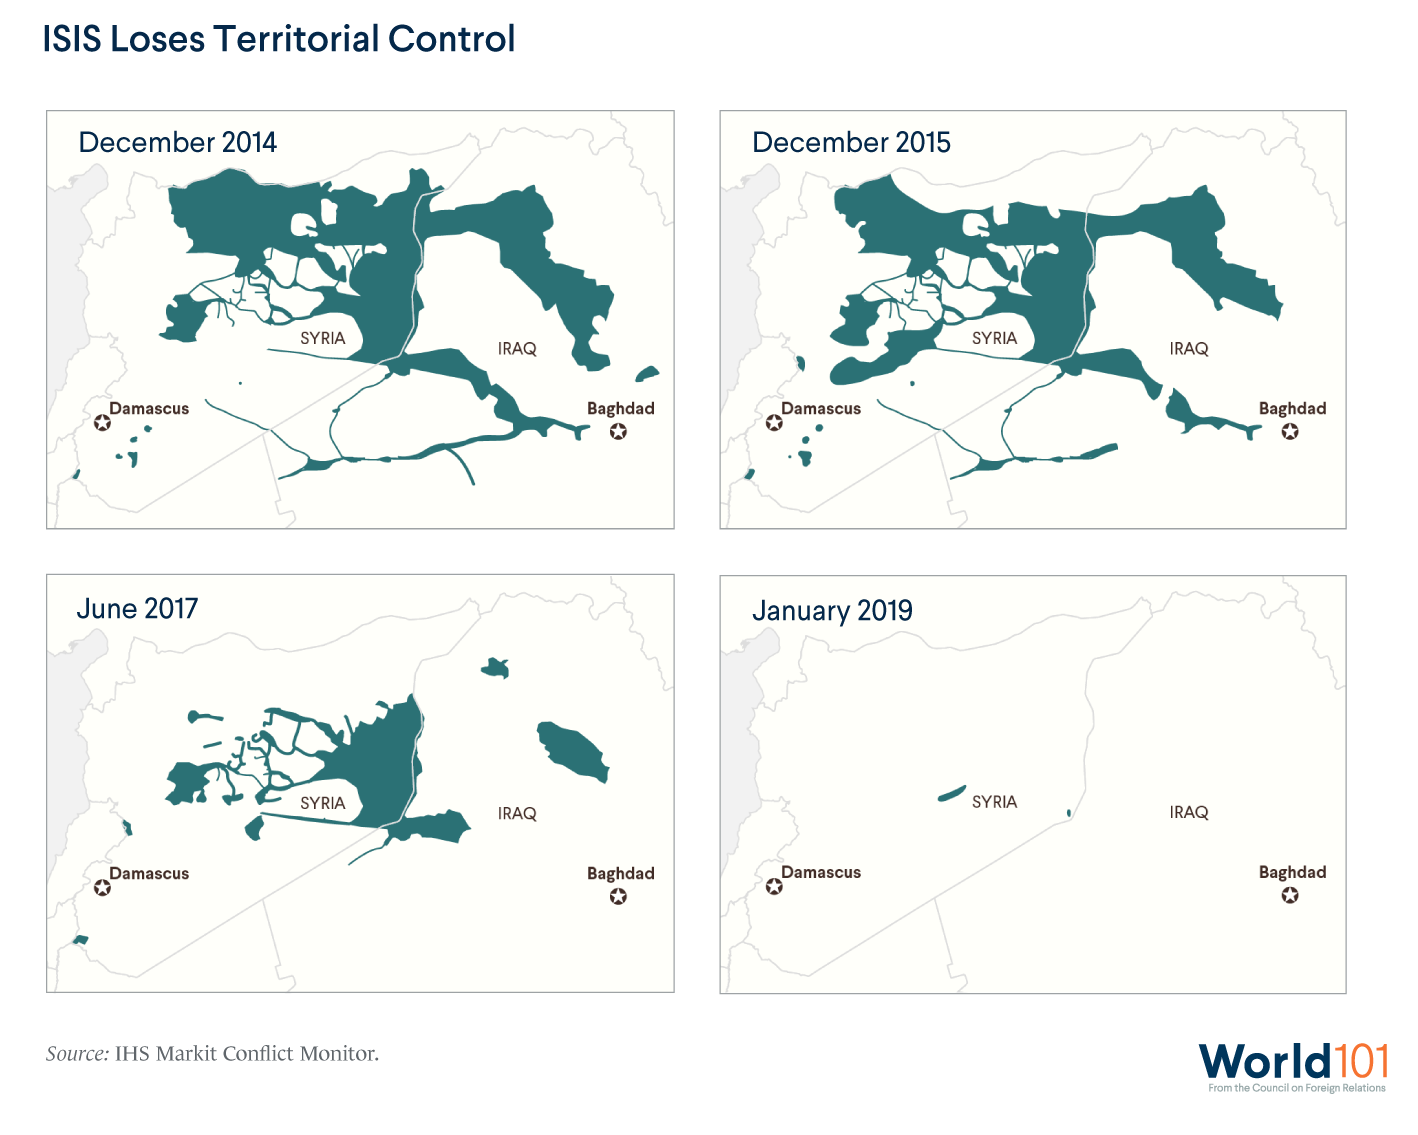 Maps showing the self-proclaimed Islamic State losing territorial control from December 2014 to December 2015 to June 2017 to January 2019. Source: IHS Markit Conflict Monitor. For more info contact us at world101@cfr.org.